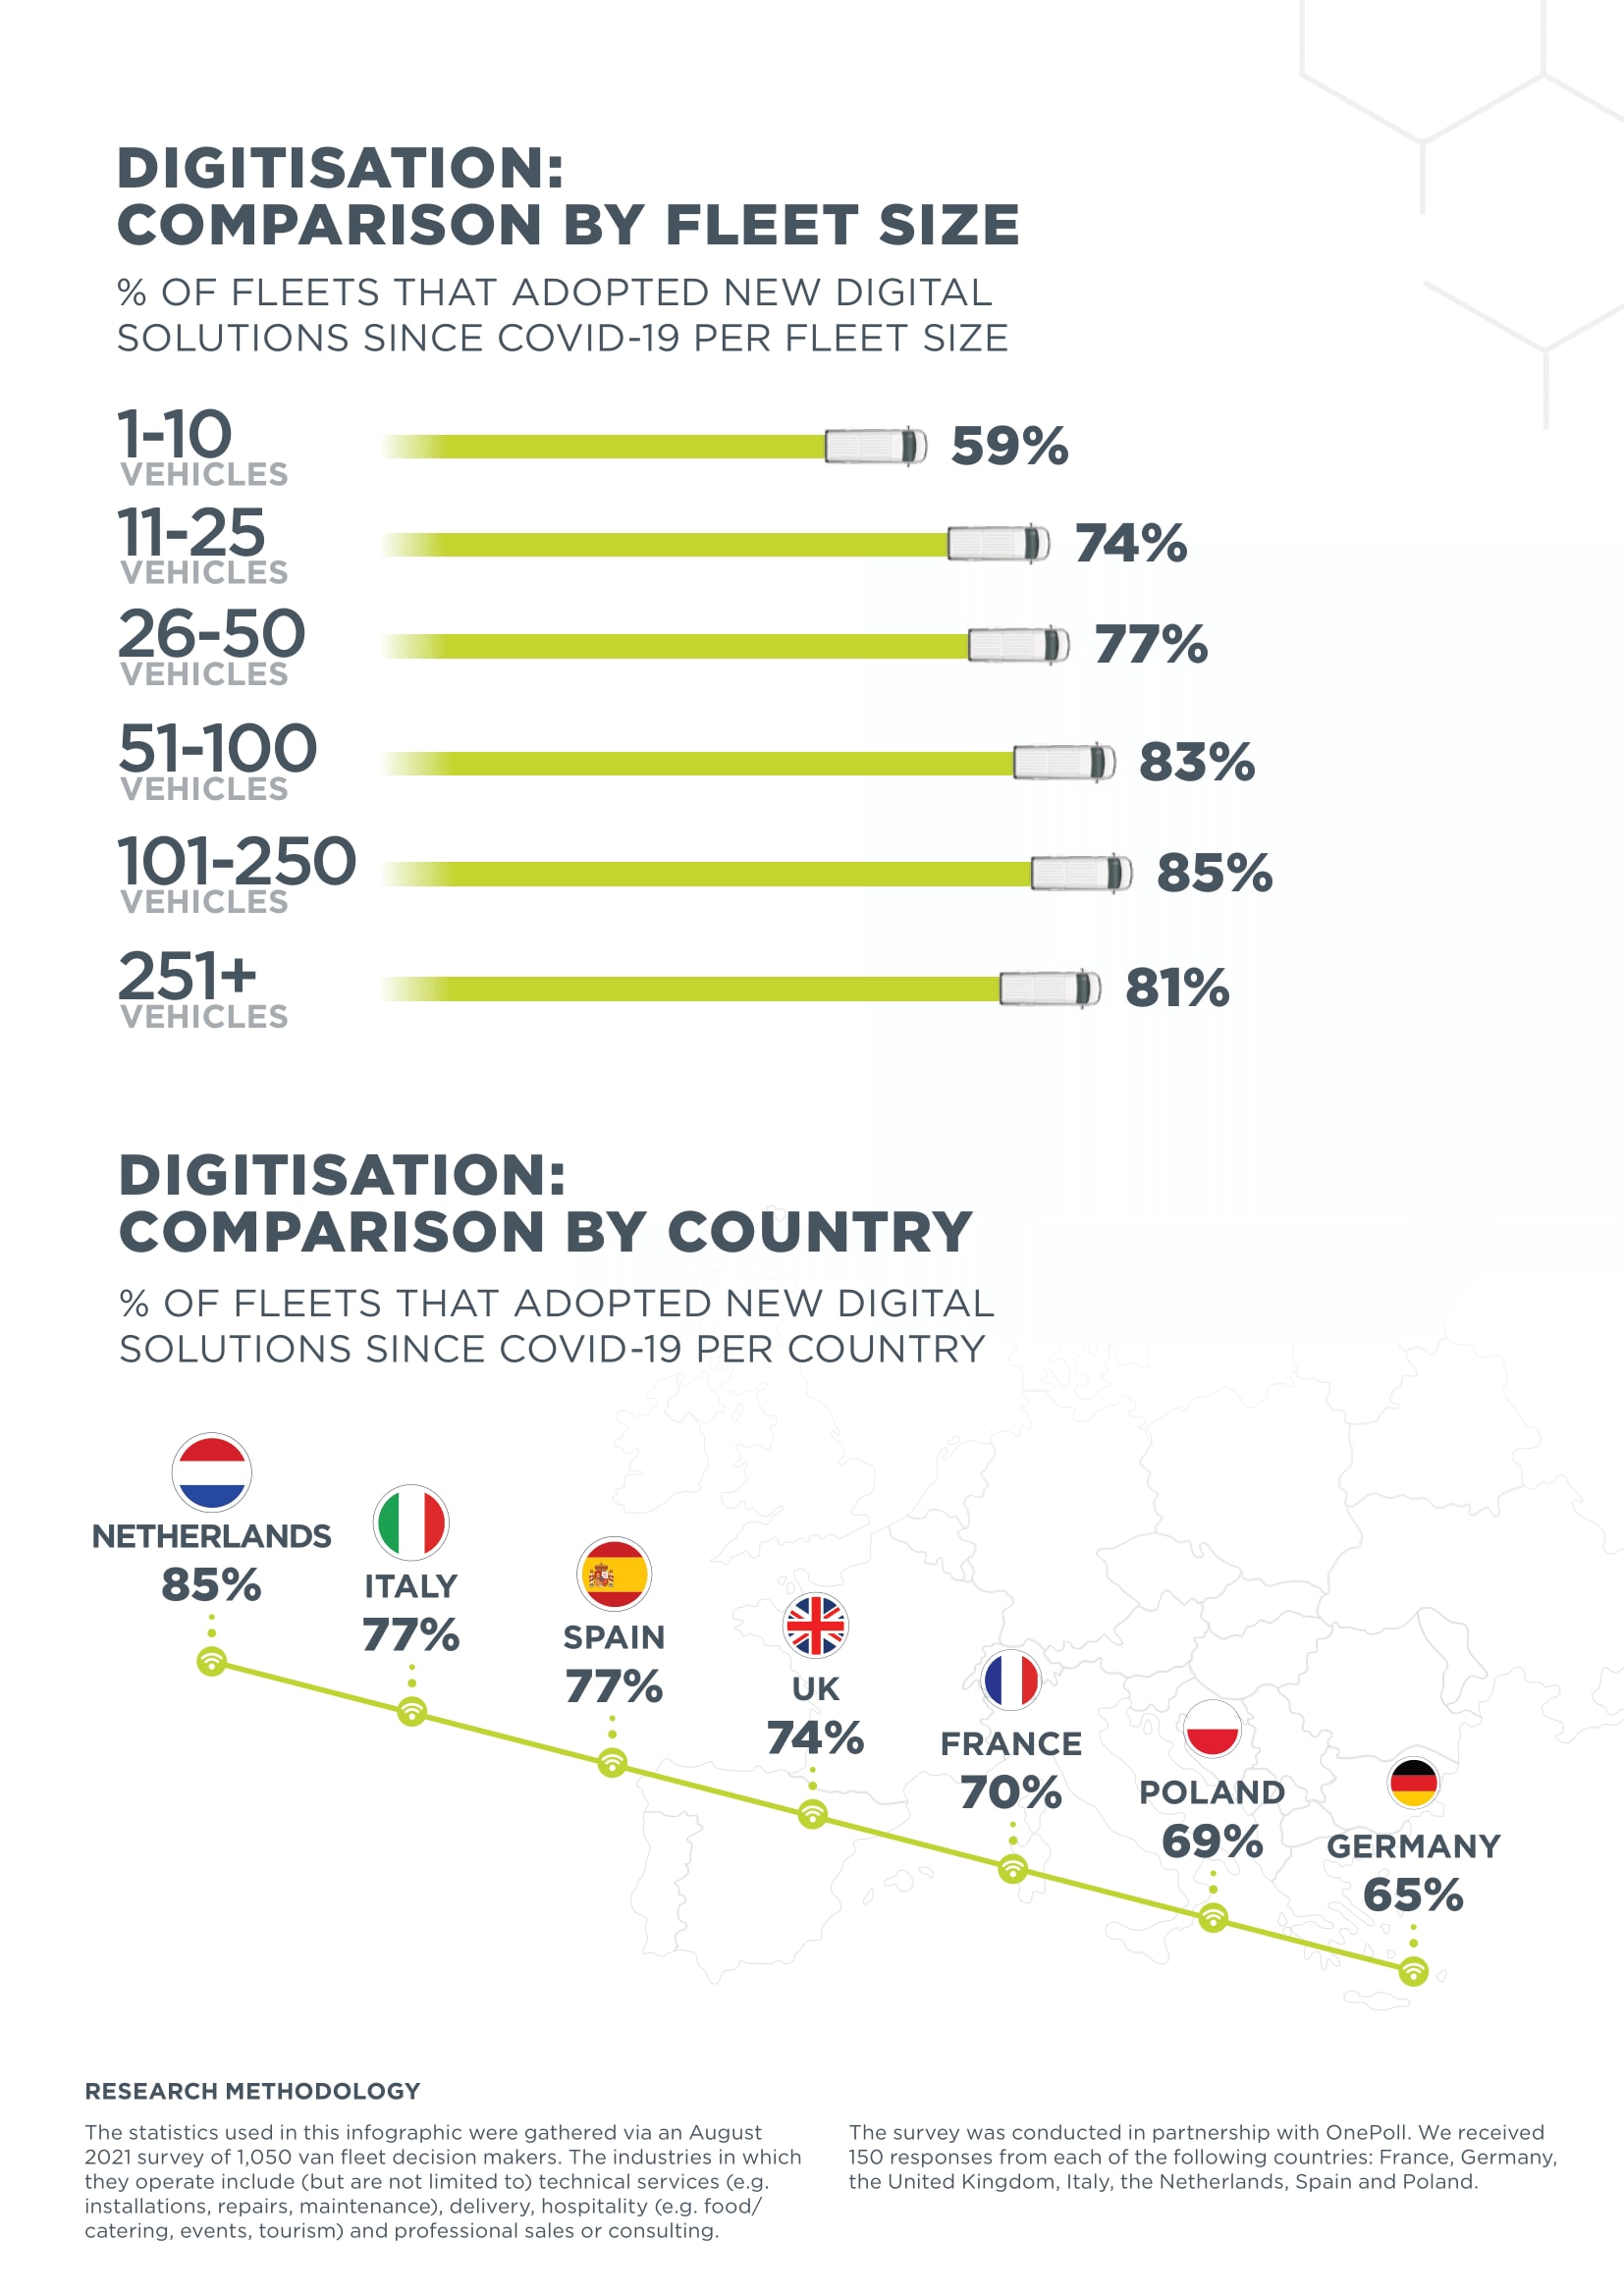 Infographic: van fleet digitisation and COVID-19 comparison by fleet size and country